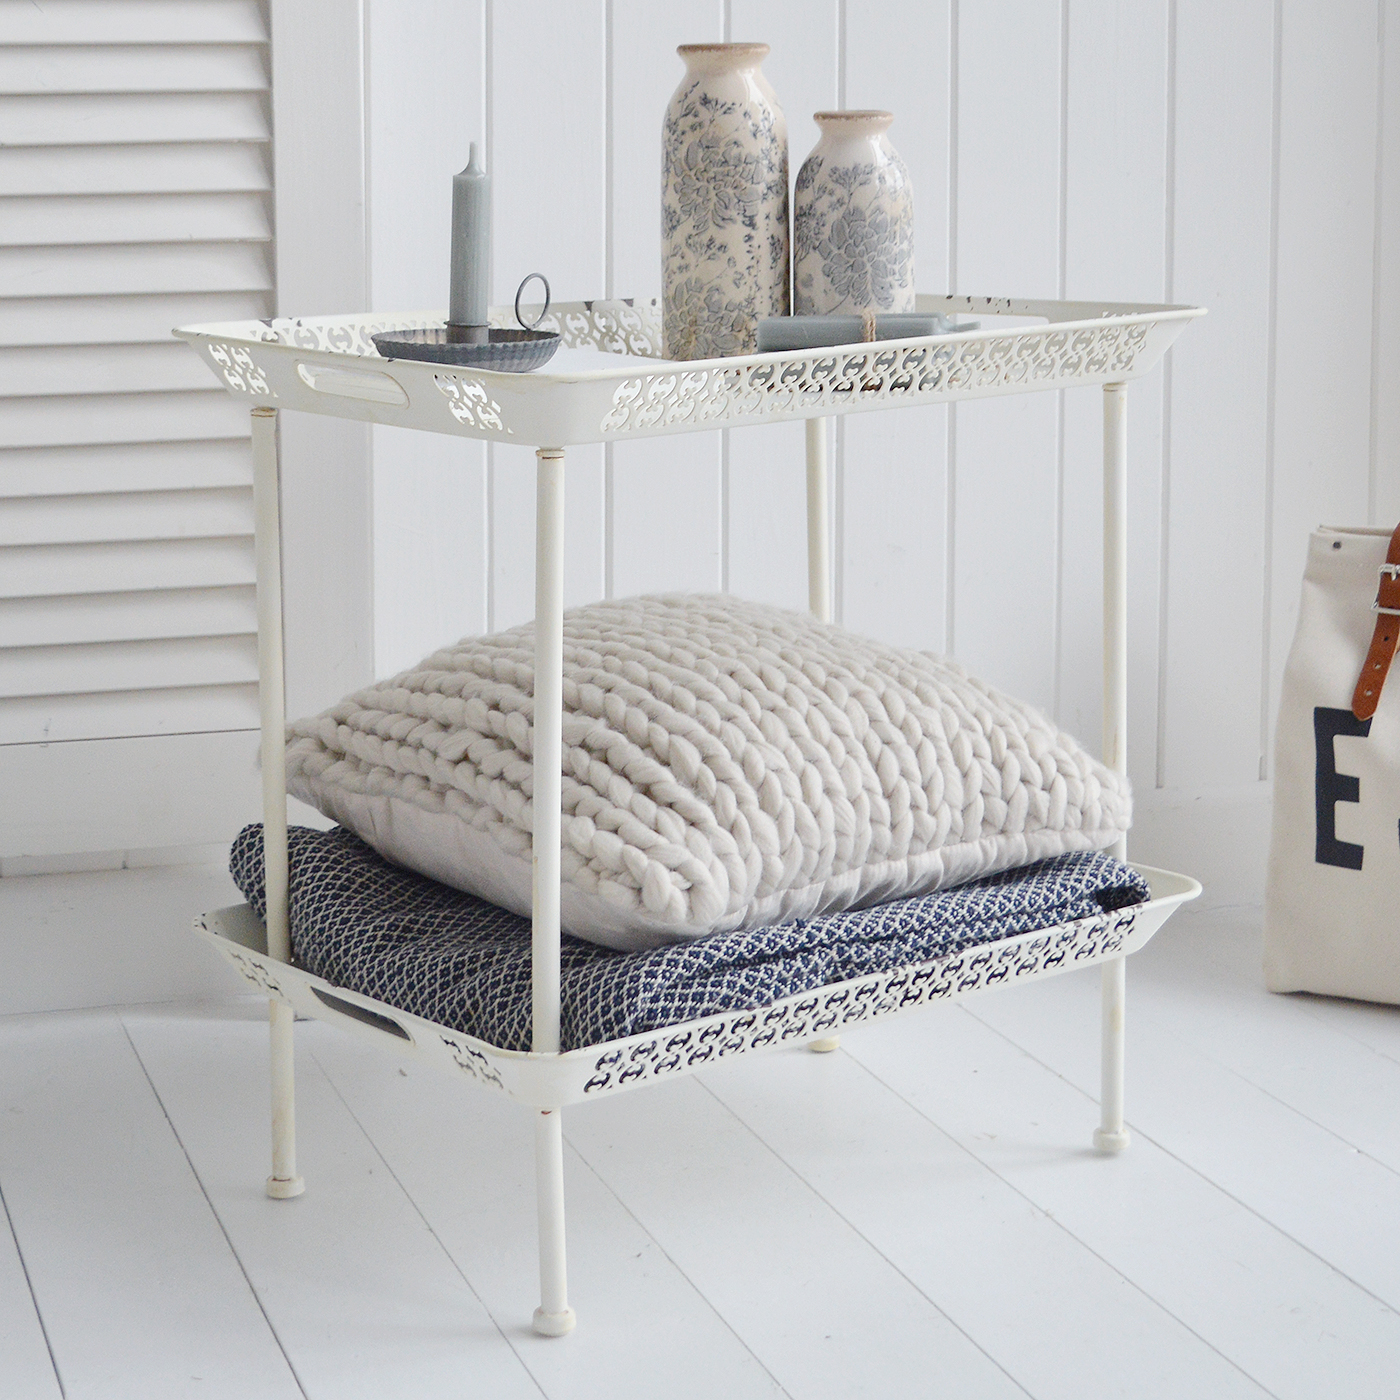 The Stockbridge distressed side table with two shelves, ideal for bedside, or living room lamp table. Bathroom, Living Room, Bedroom and Hallway Furniture for beautiful homes. Furniture for New England, country farm house and coastal styled home interior